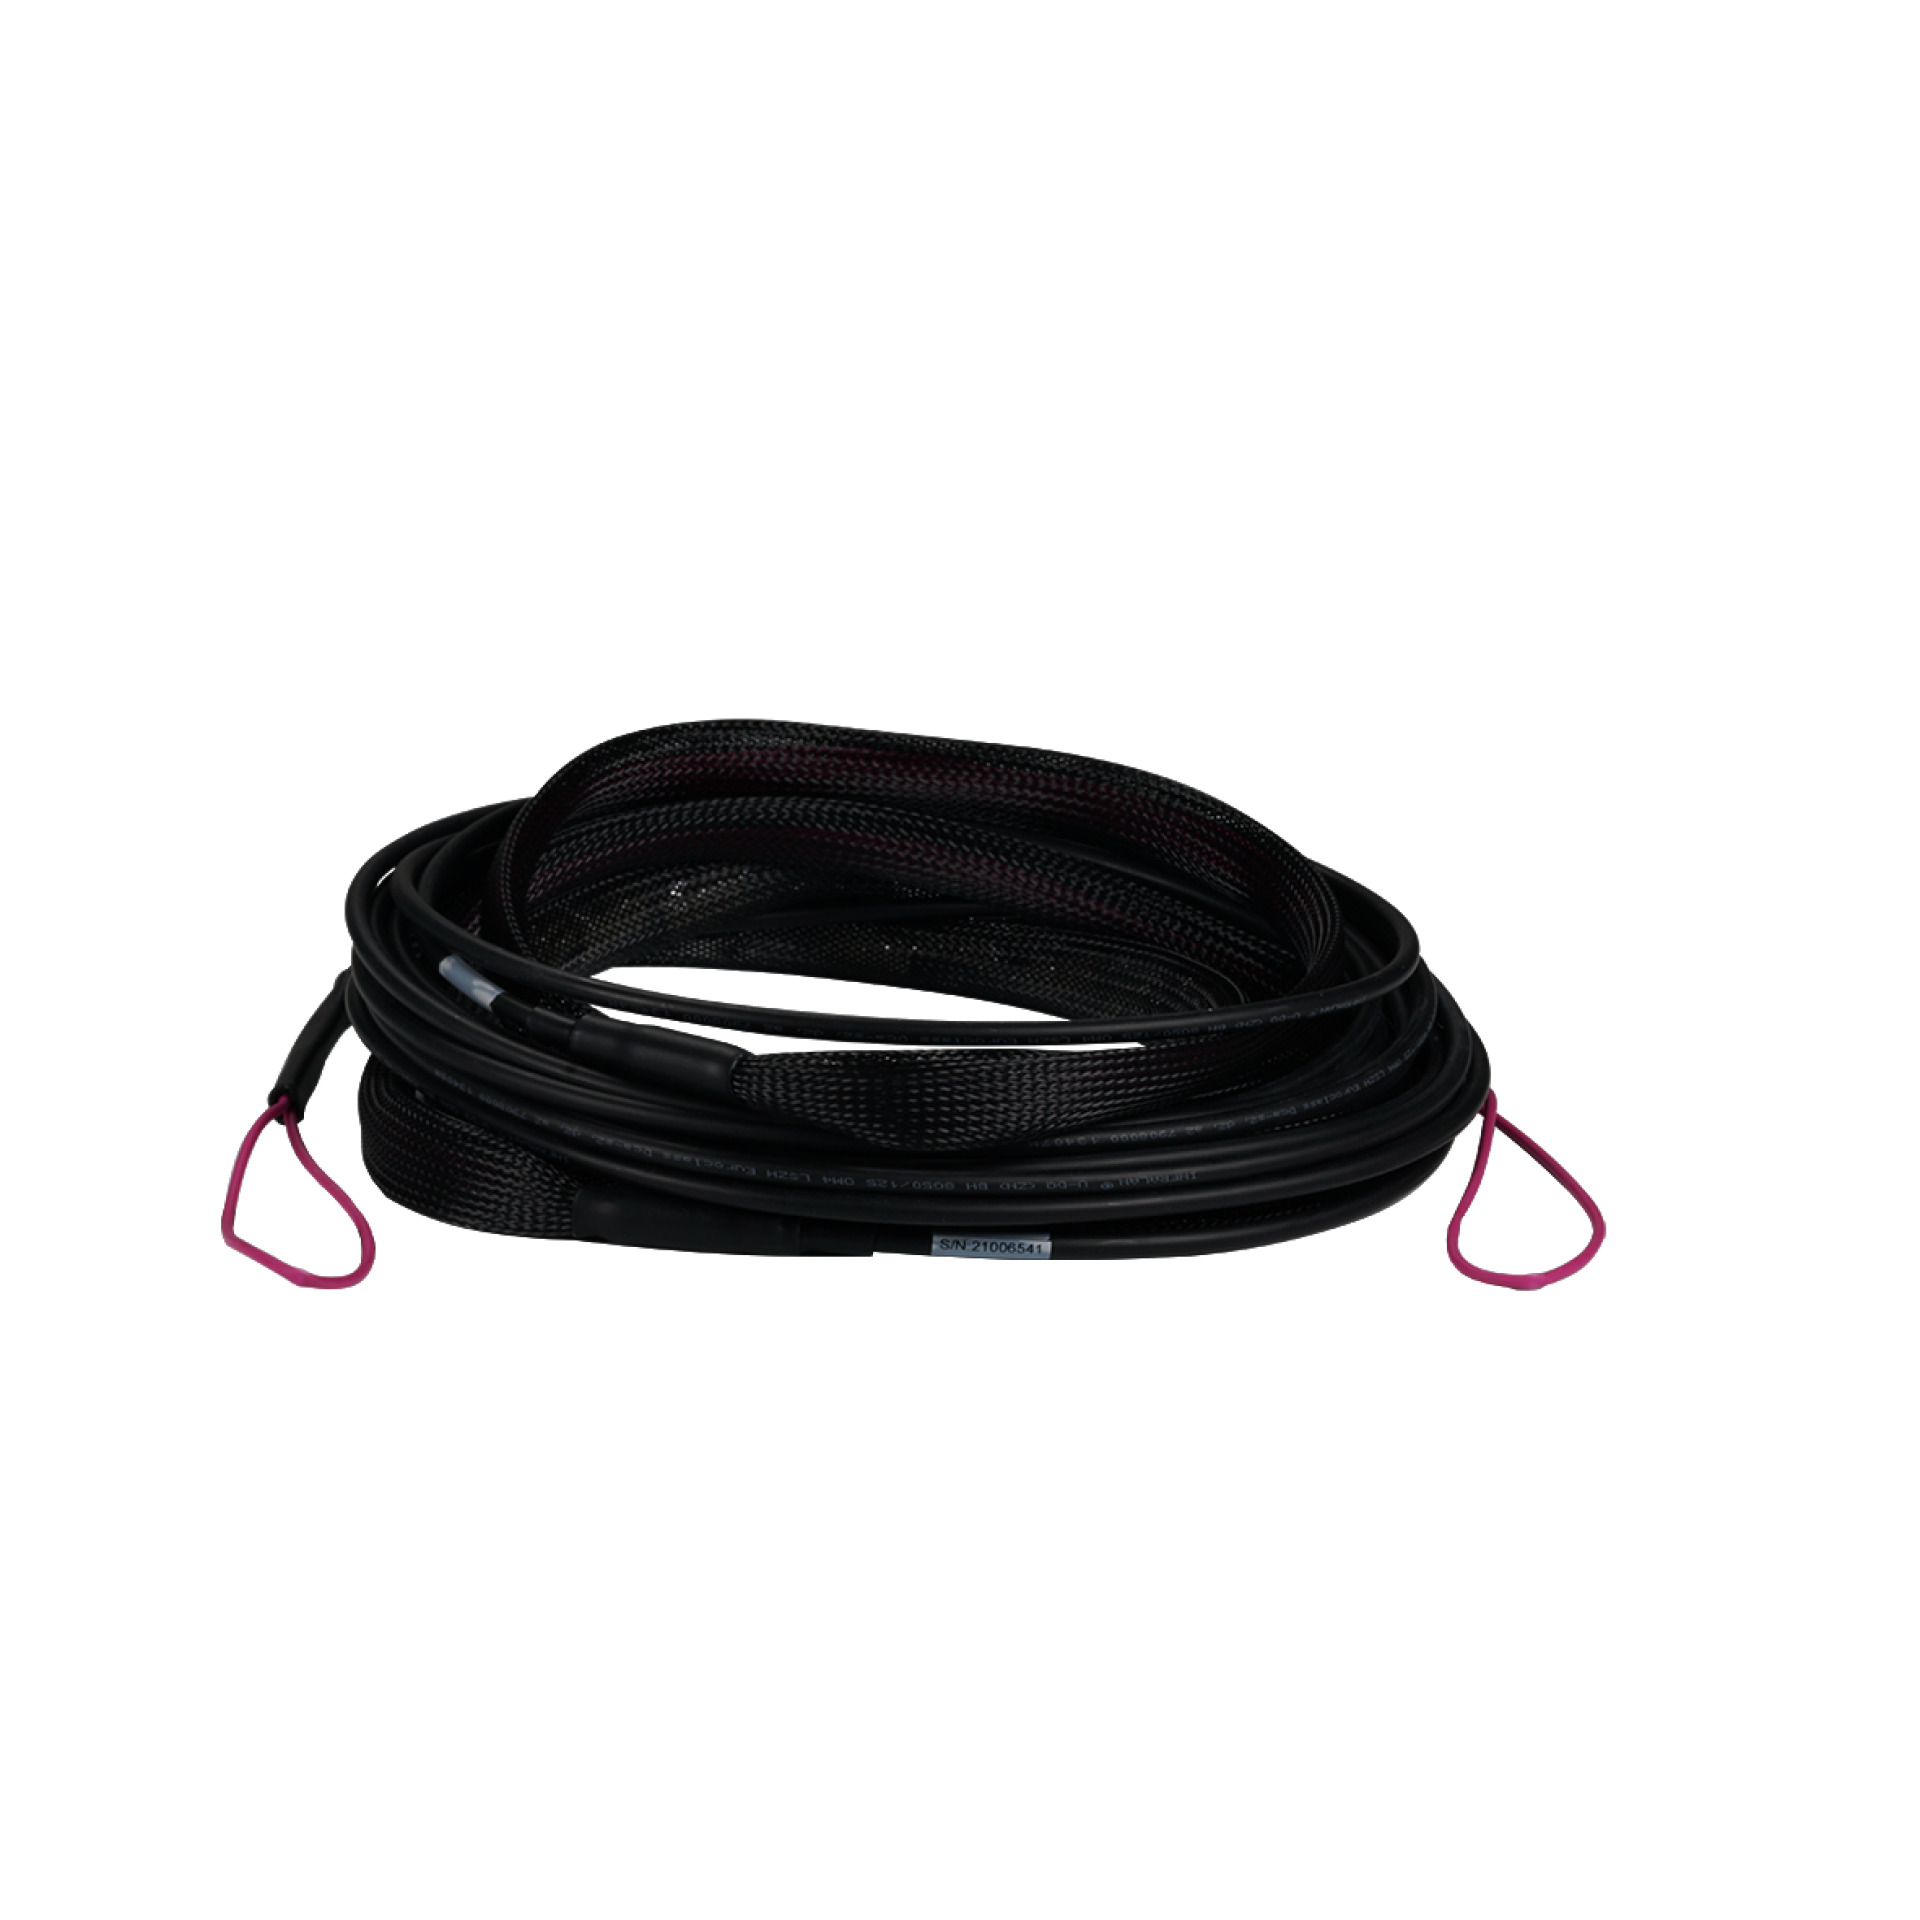 Trunk cable U-DQ(ZN)BH 4G 50/125, SC/SC OM4 100m